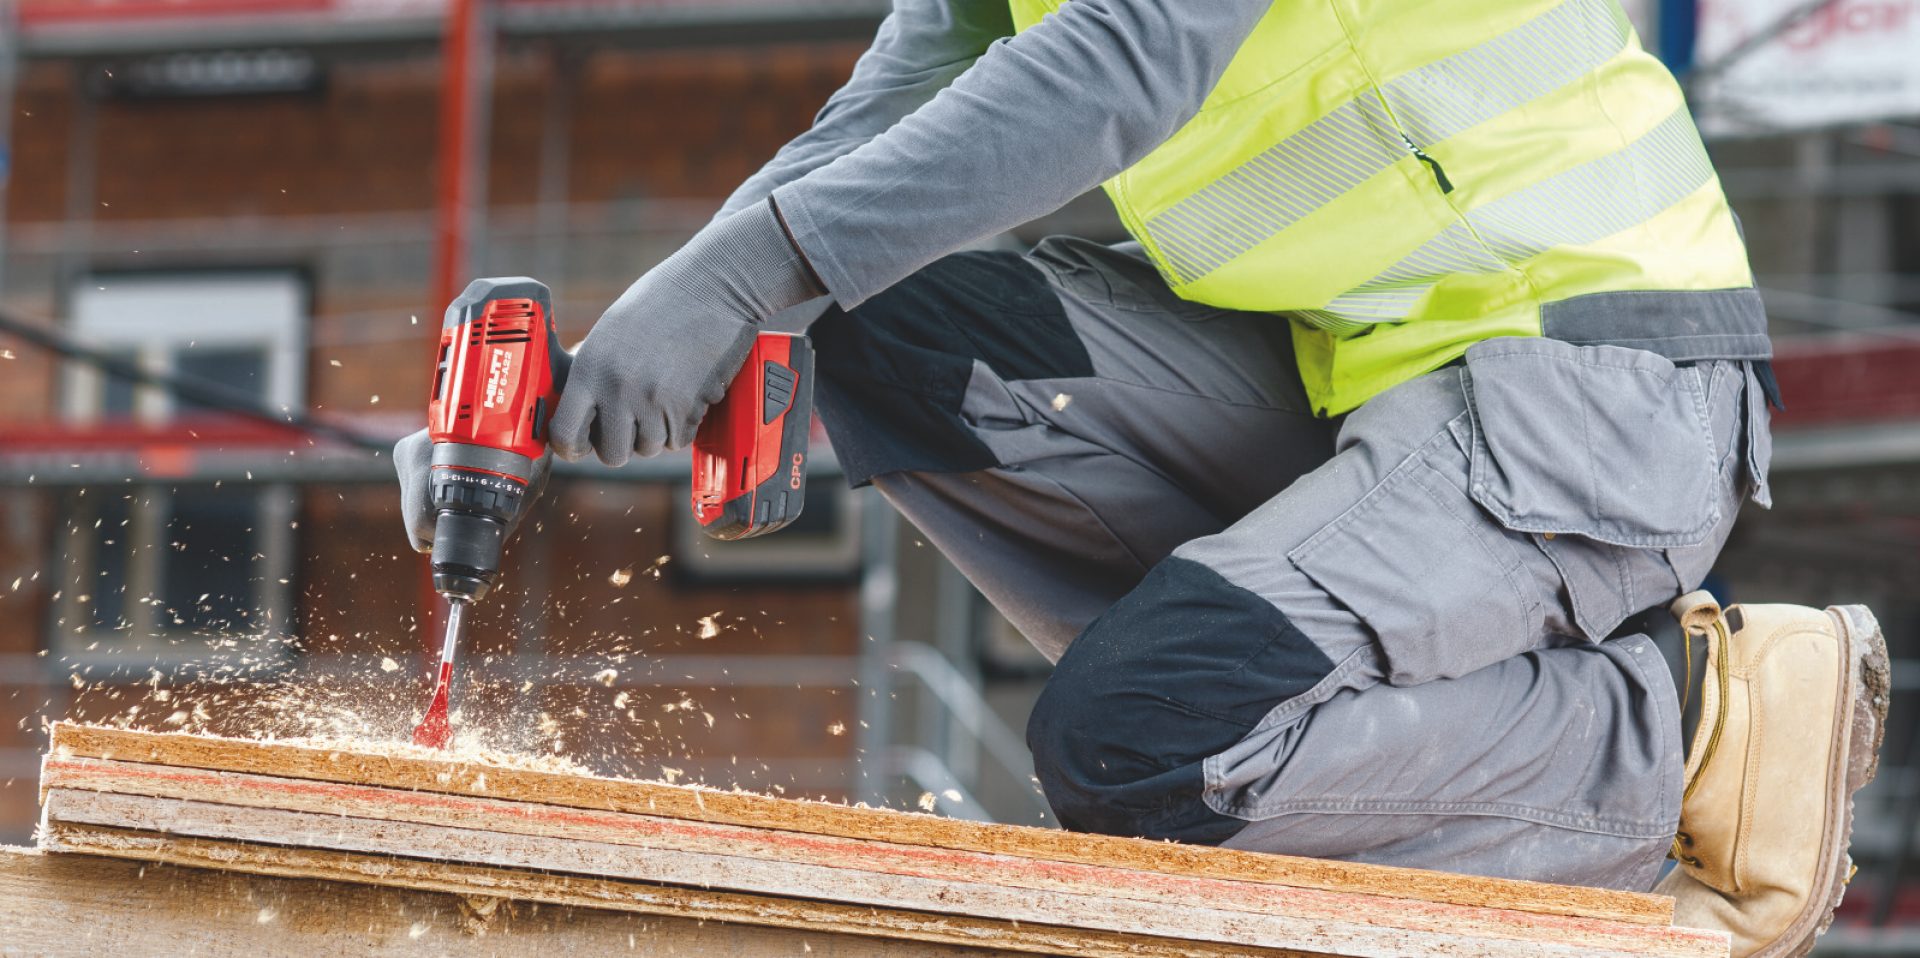 Staying safe during drilling and demolition